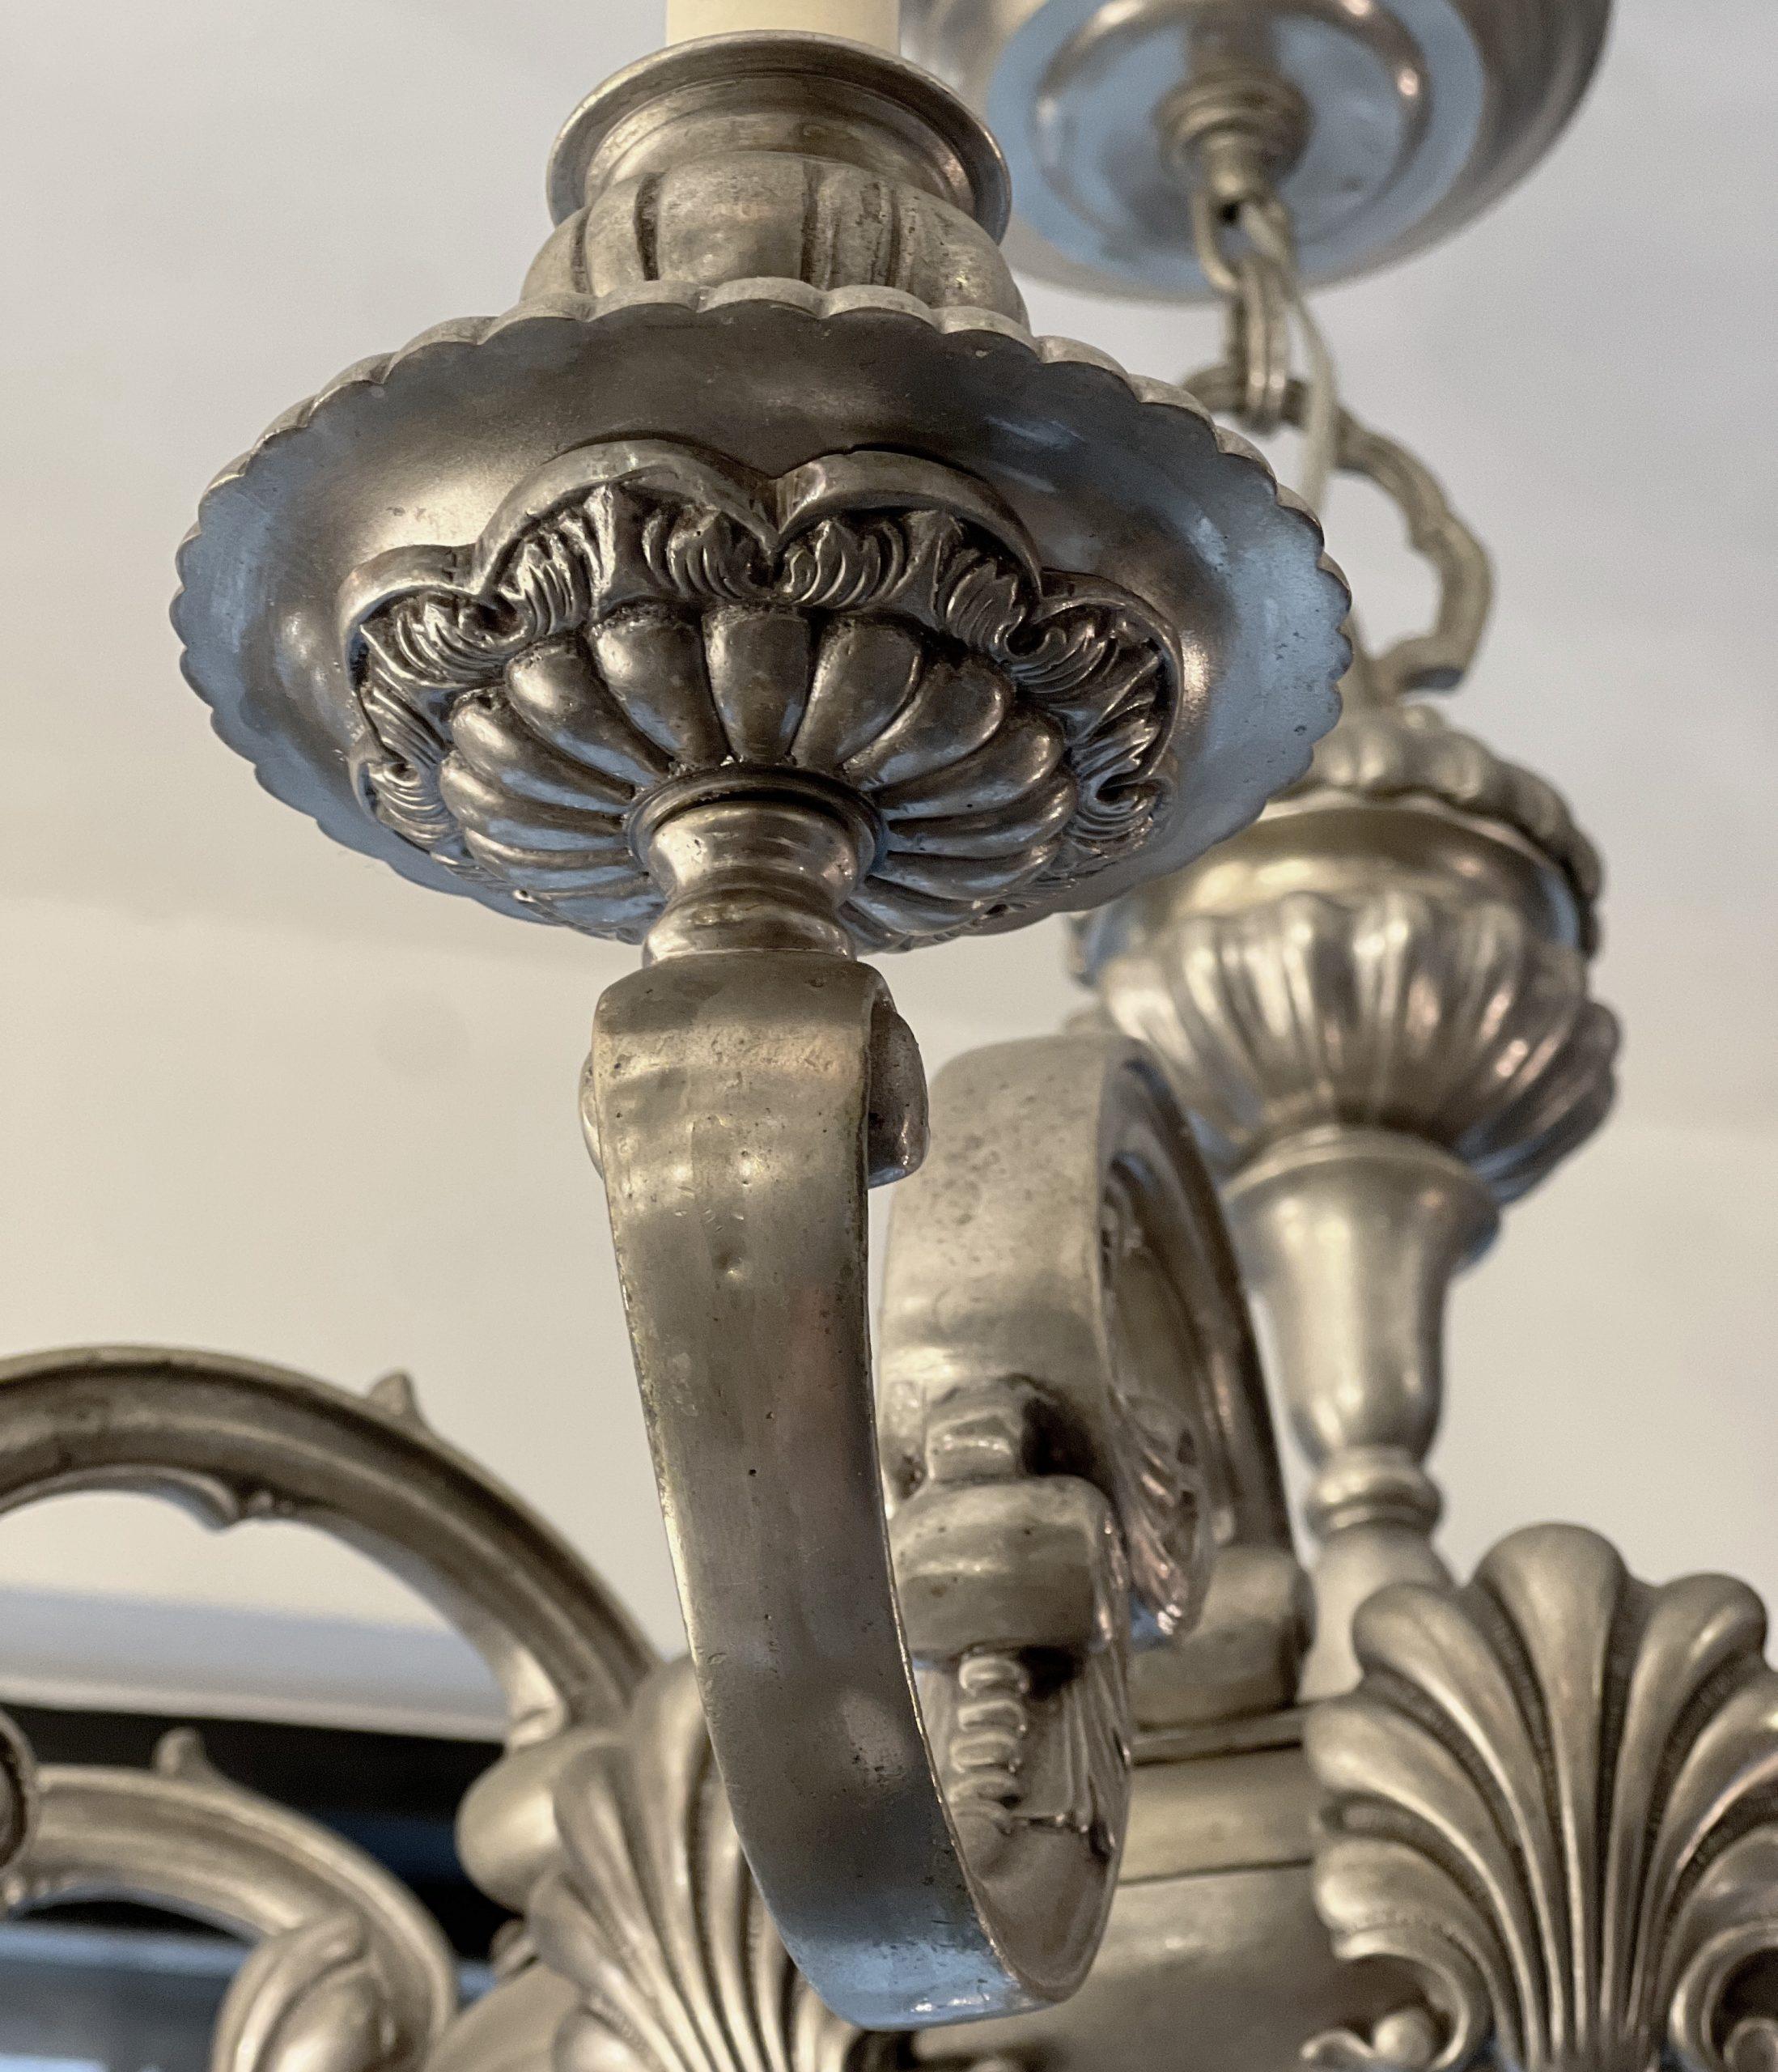 A circa 1910's American silver-plated neoclassic style 10-arm chandelier with shell motif.

Measurements:
Height: 26